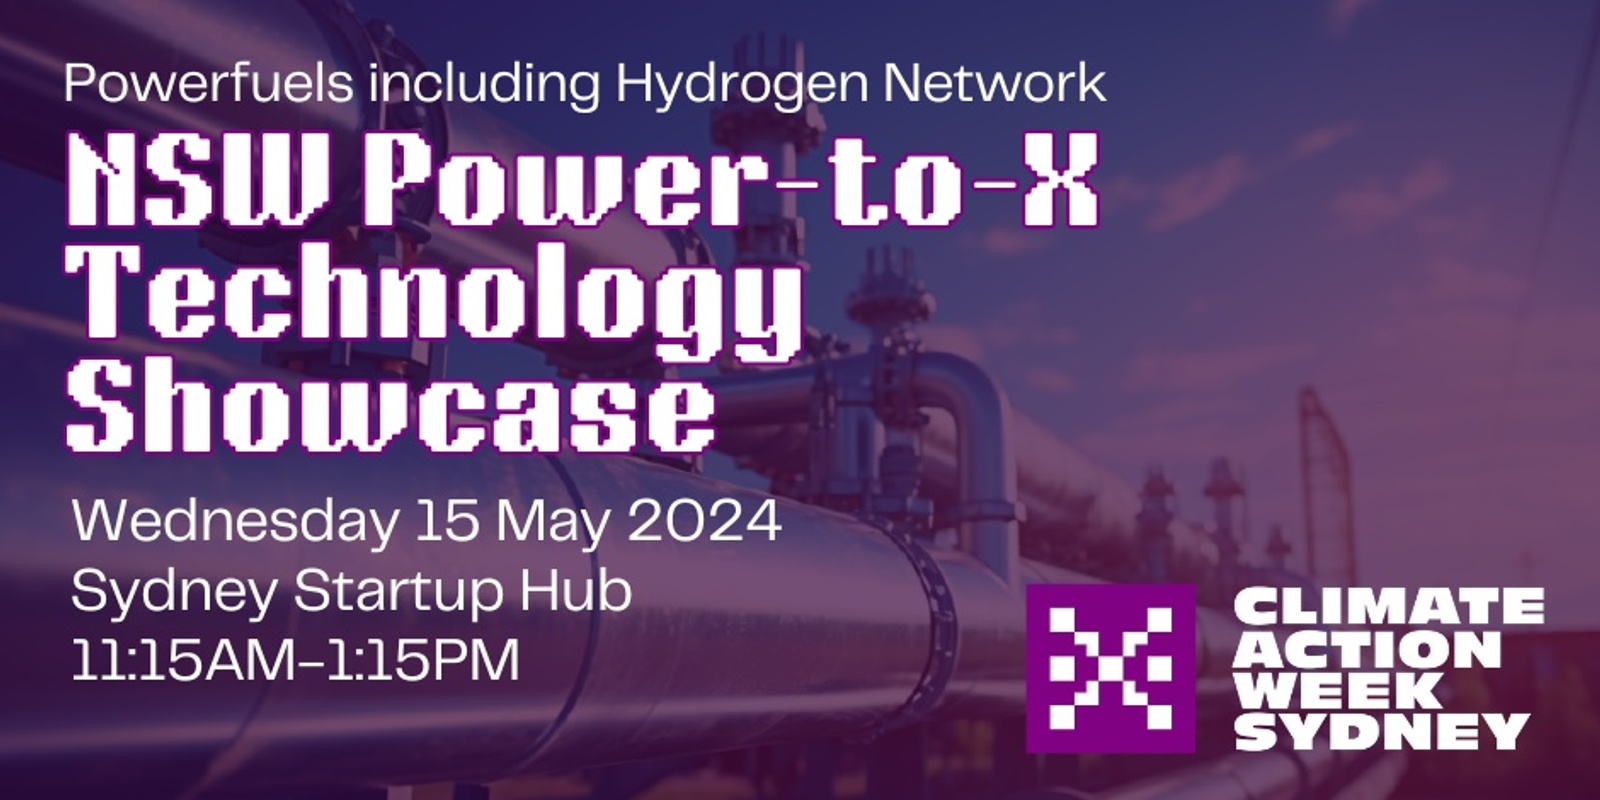 Banner image for NSW Power-to-X Technology Showcase - Powerfuels Including Hydrogen Network